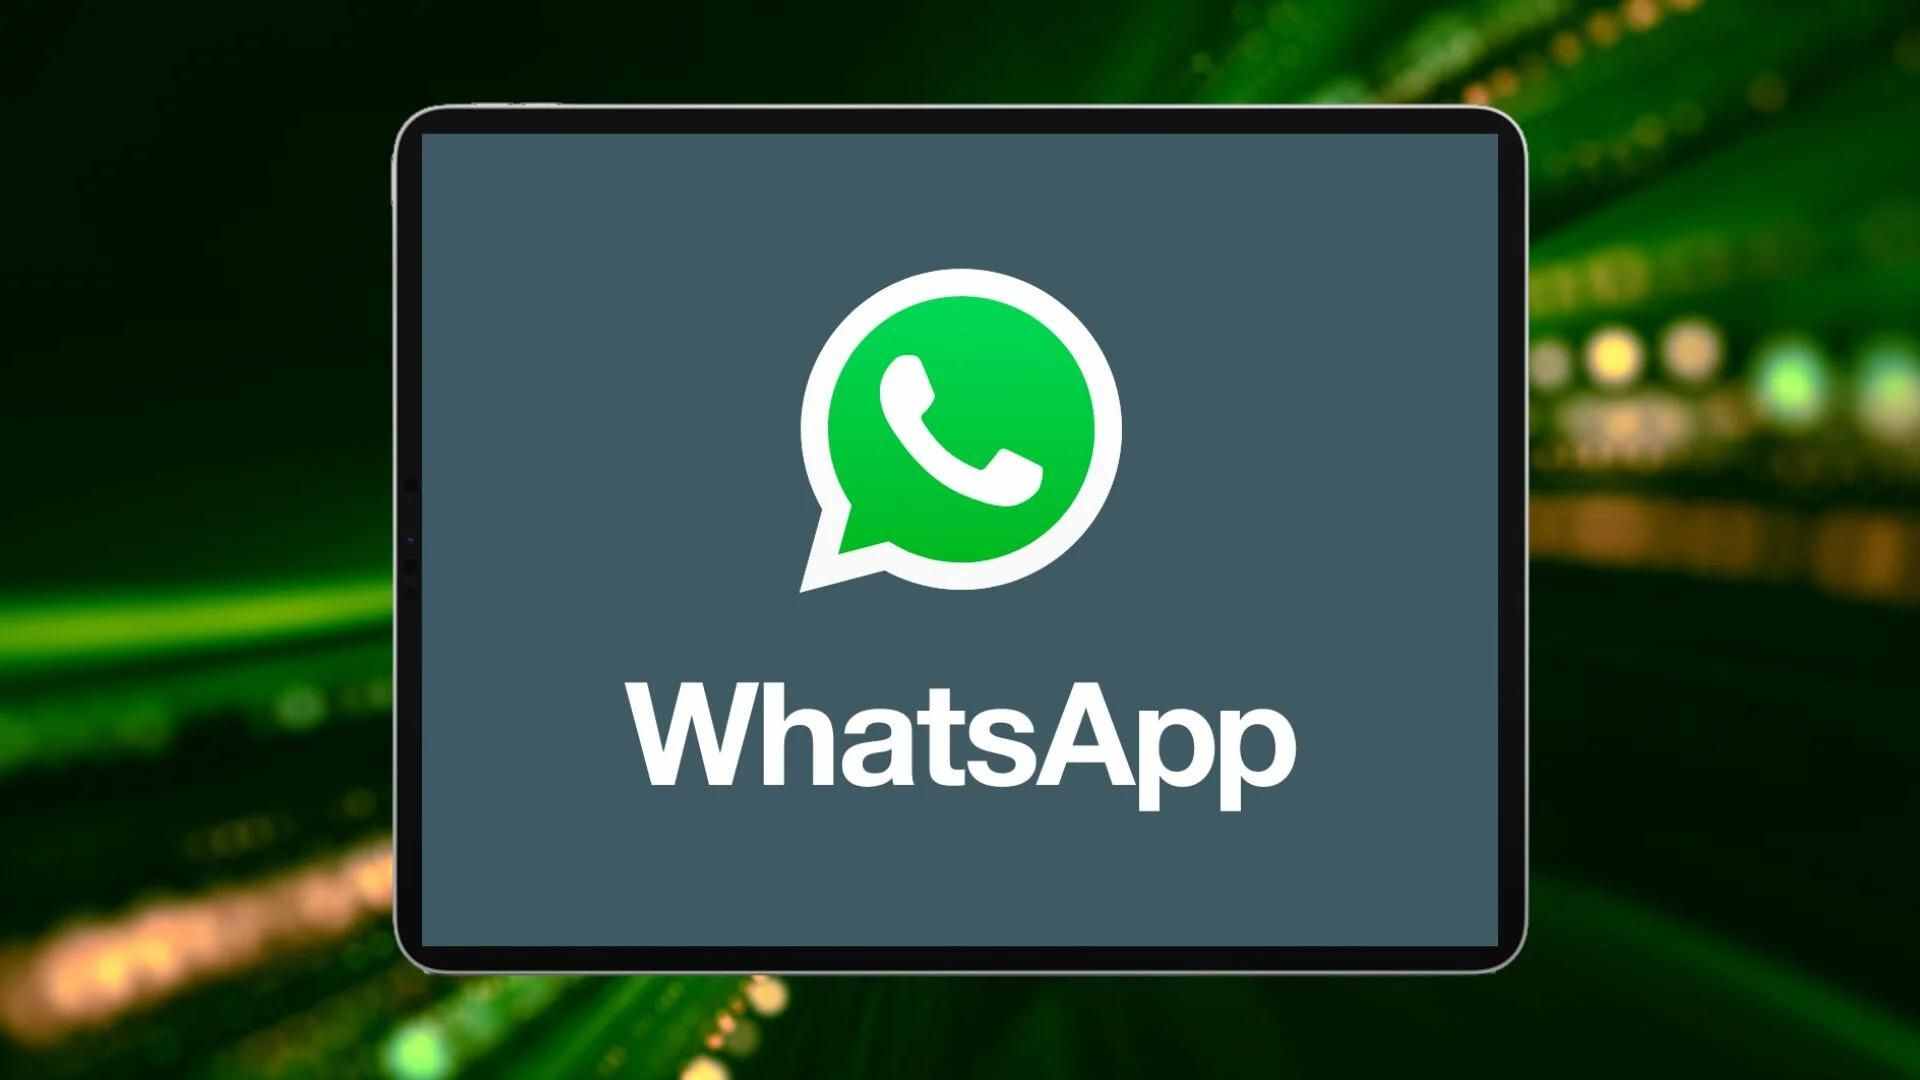 Govt Highlights 4 Key Reasons For WhatsApp To Comply With IT Rules